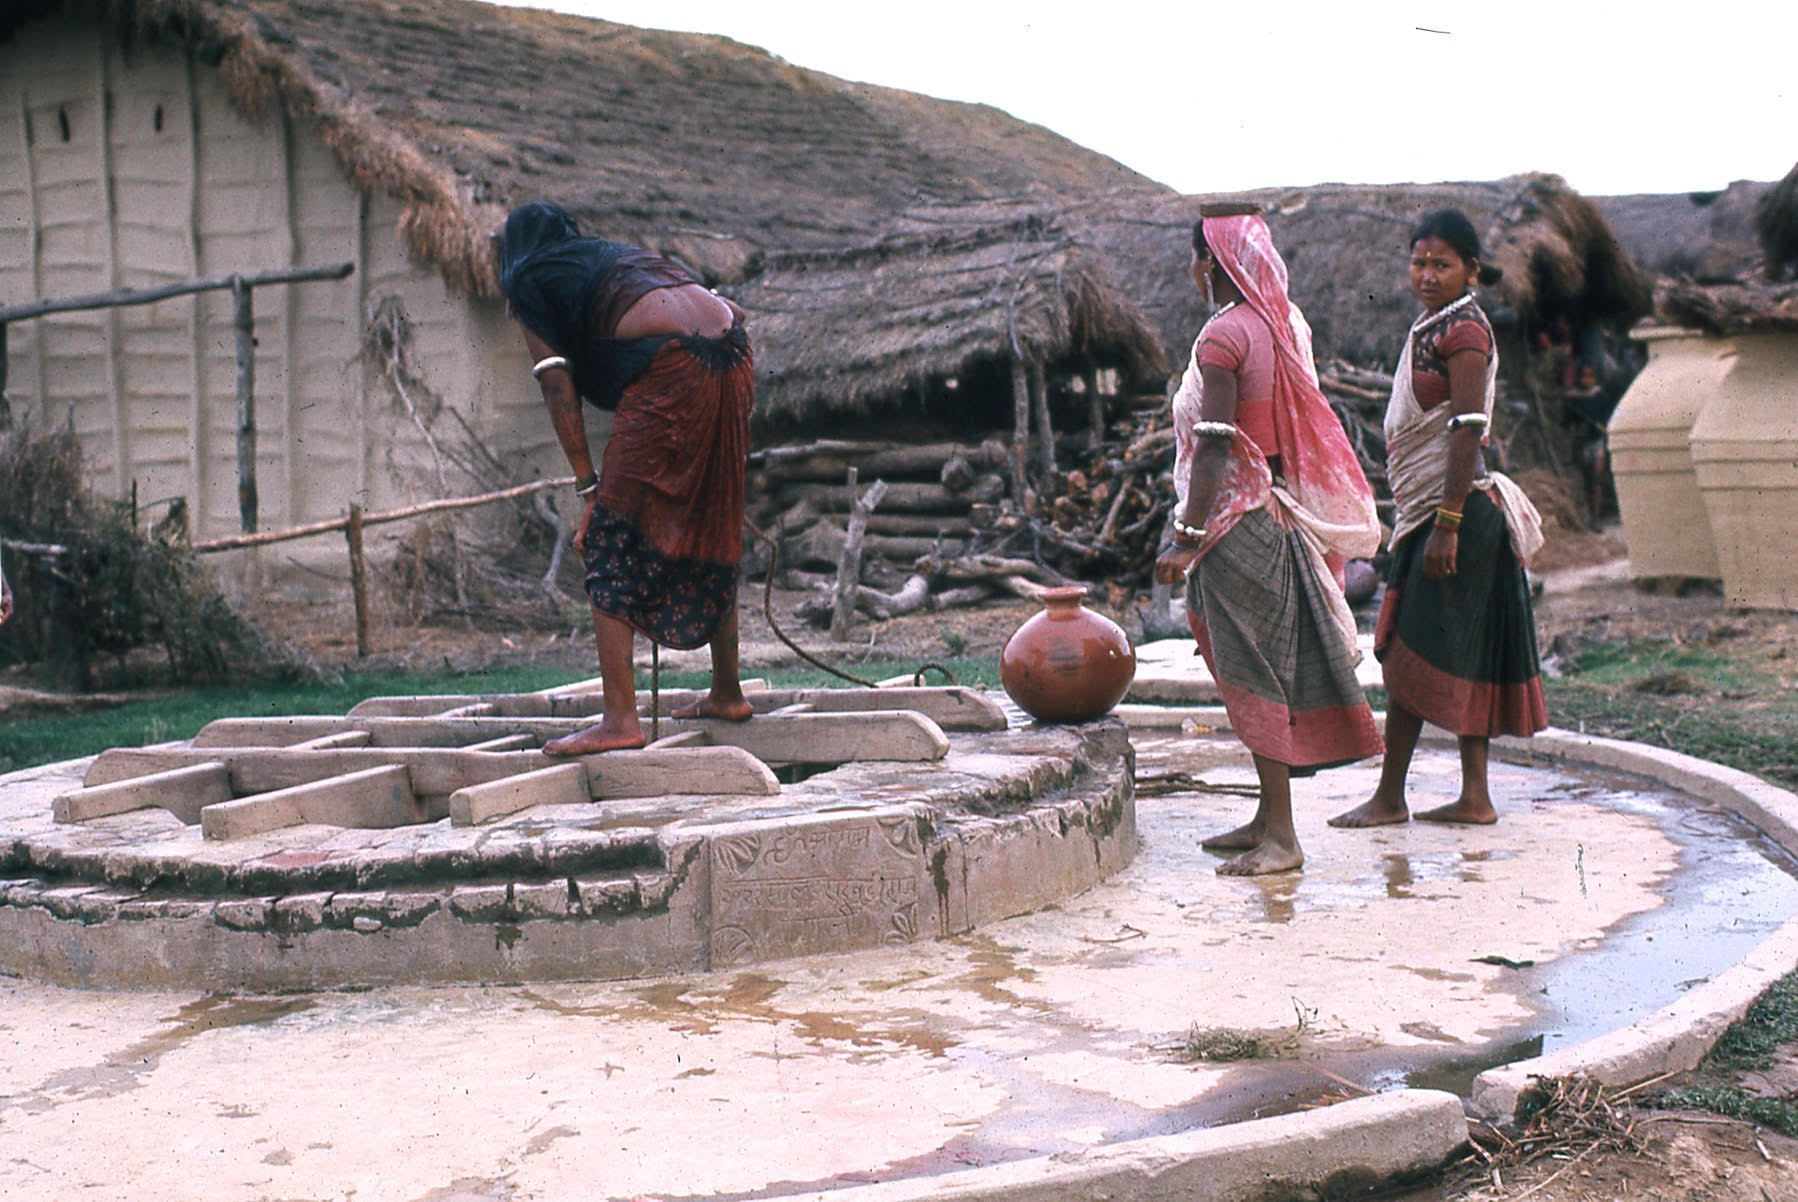 Three women collect water in pots from village well. One woman looks down the well and another faces the camera.